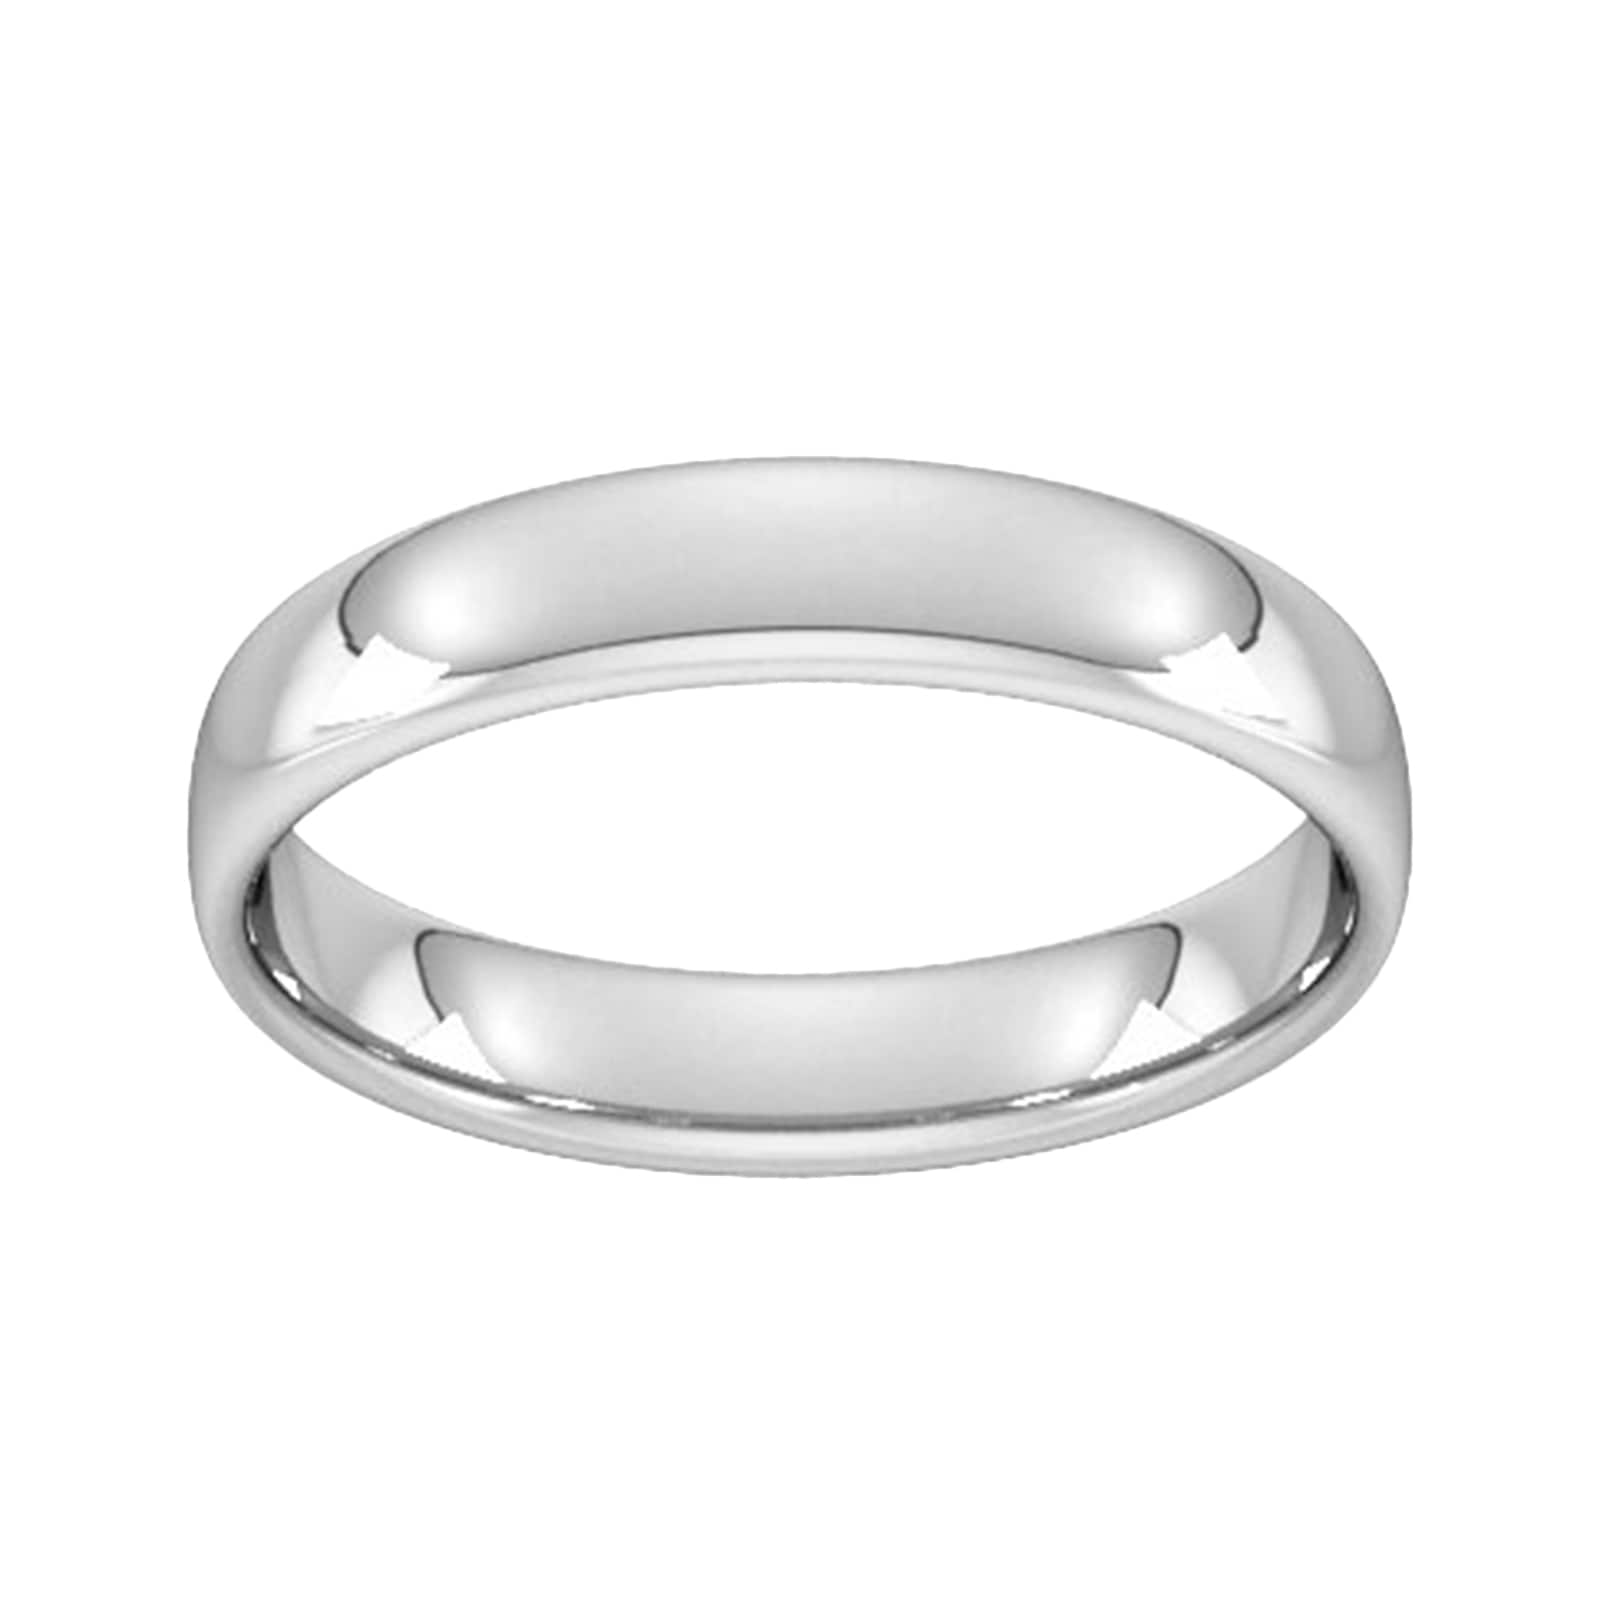 Amazon.com: Juno Jewelry 18k White Gold 3mm Classic Plain Comfort Fit  Wedding Band Ring, 4 : Clothing, Shoes & Jewelry